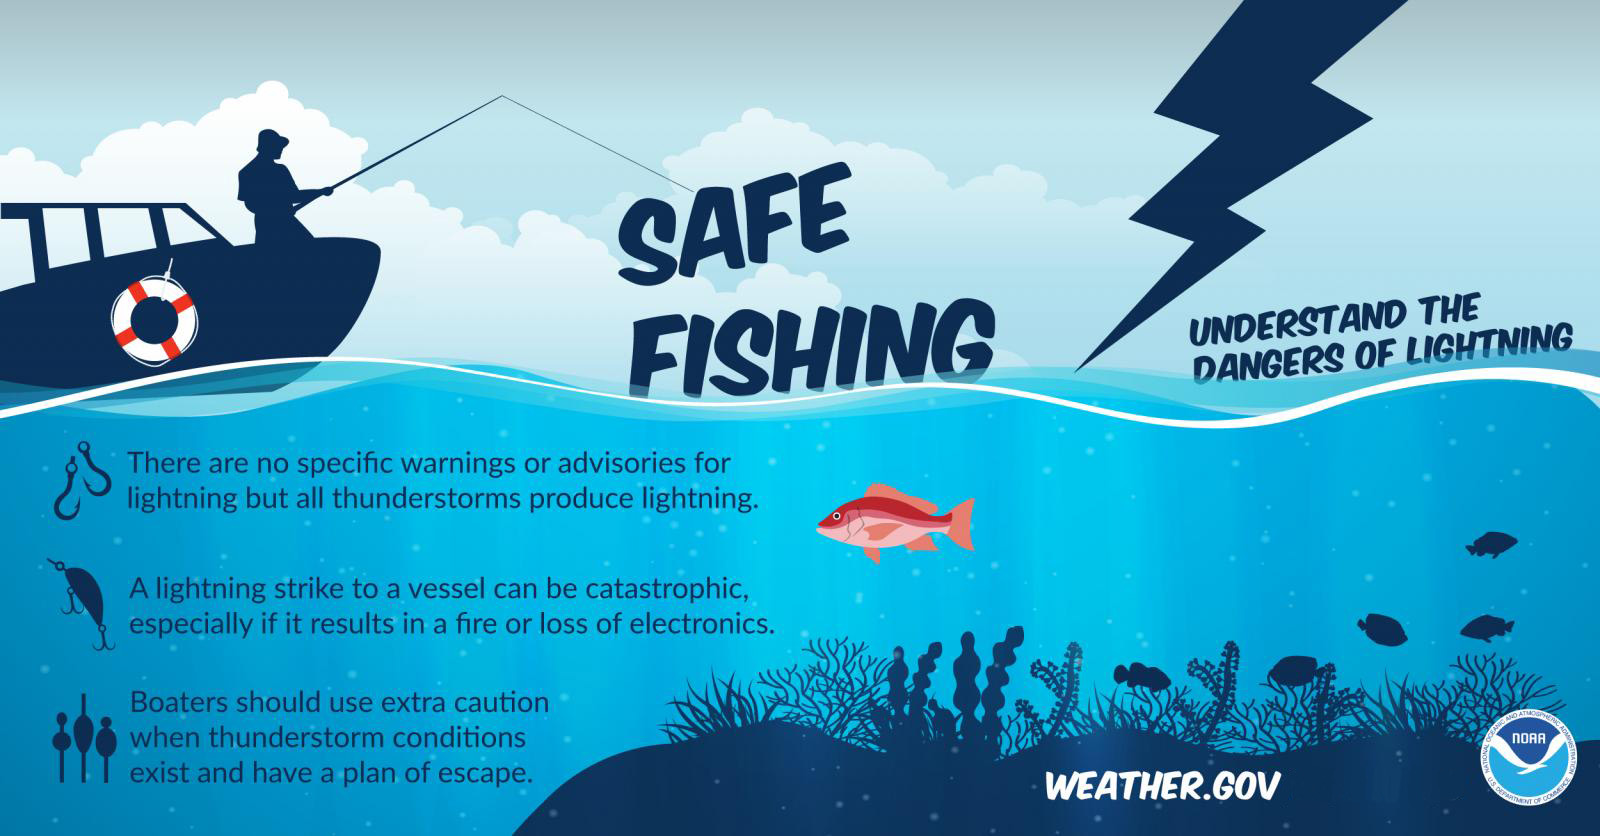 Safe Fishing: Understand the dangers of lightning. There are no specific warnings or advisories for lightning but all thunderstorms produce lightning. A lightning strike to a vessel can be catastrophic, especially if it results in a fire or loss of electronics. Boaters should use extra caution when thunderstorm conditions exist and have a plan of escape.